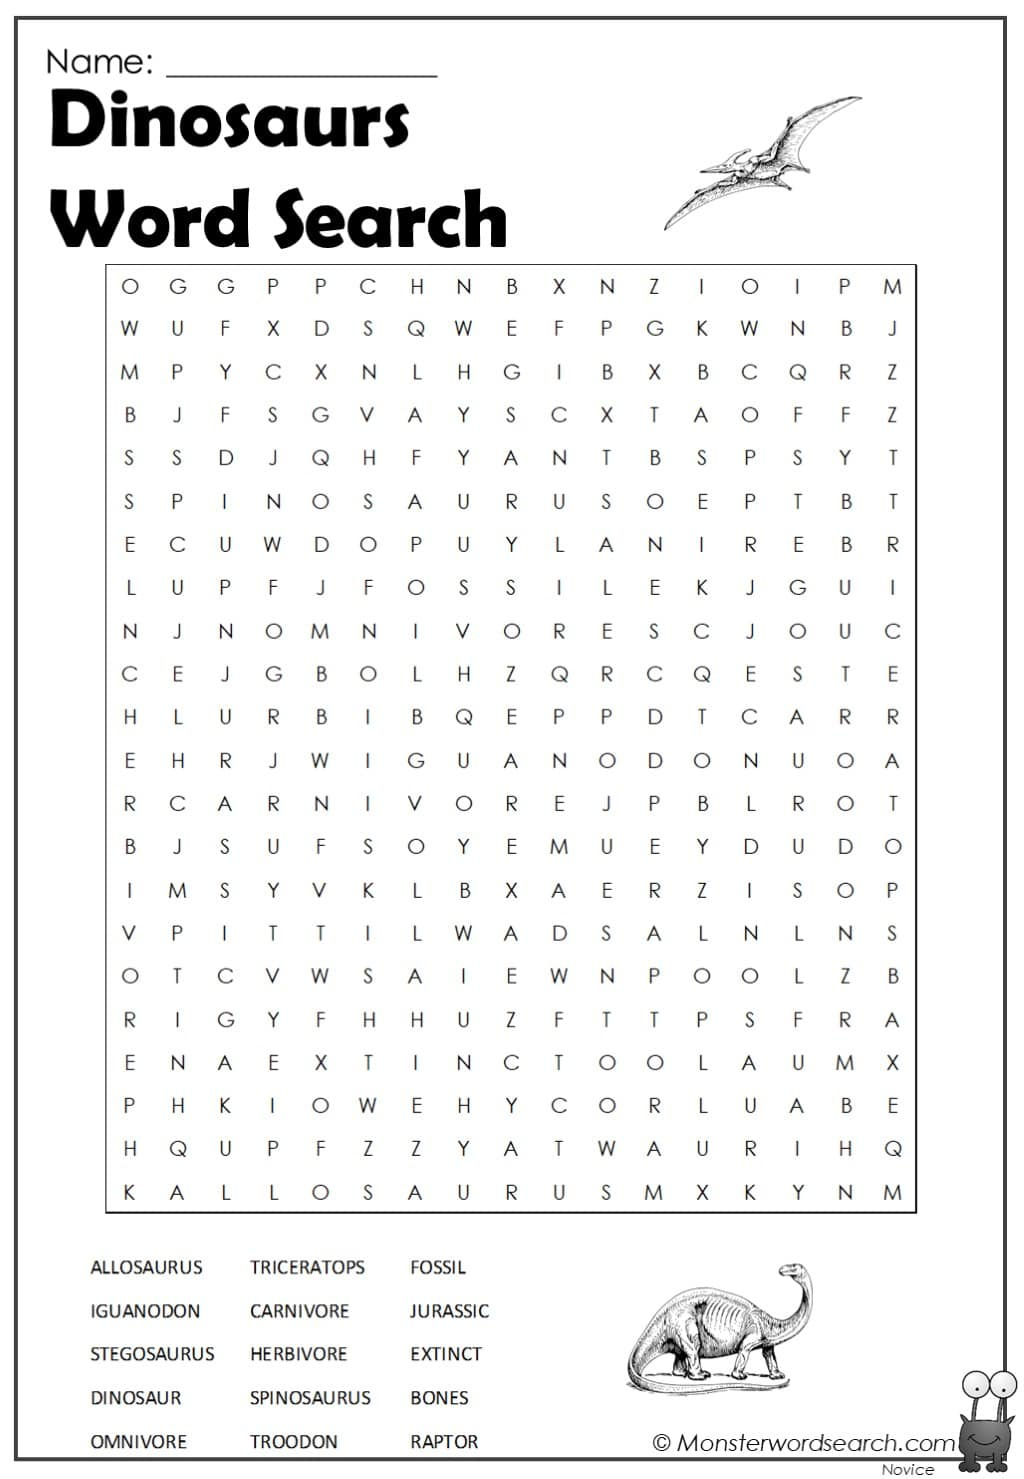 Dinosaurs Word Search - Monster Word Search throughout Free Printable Dinosaur Word Search